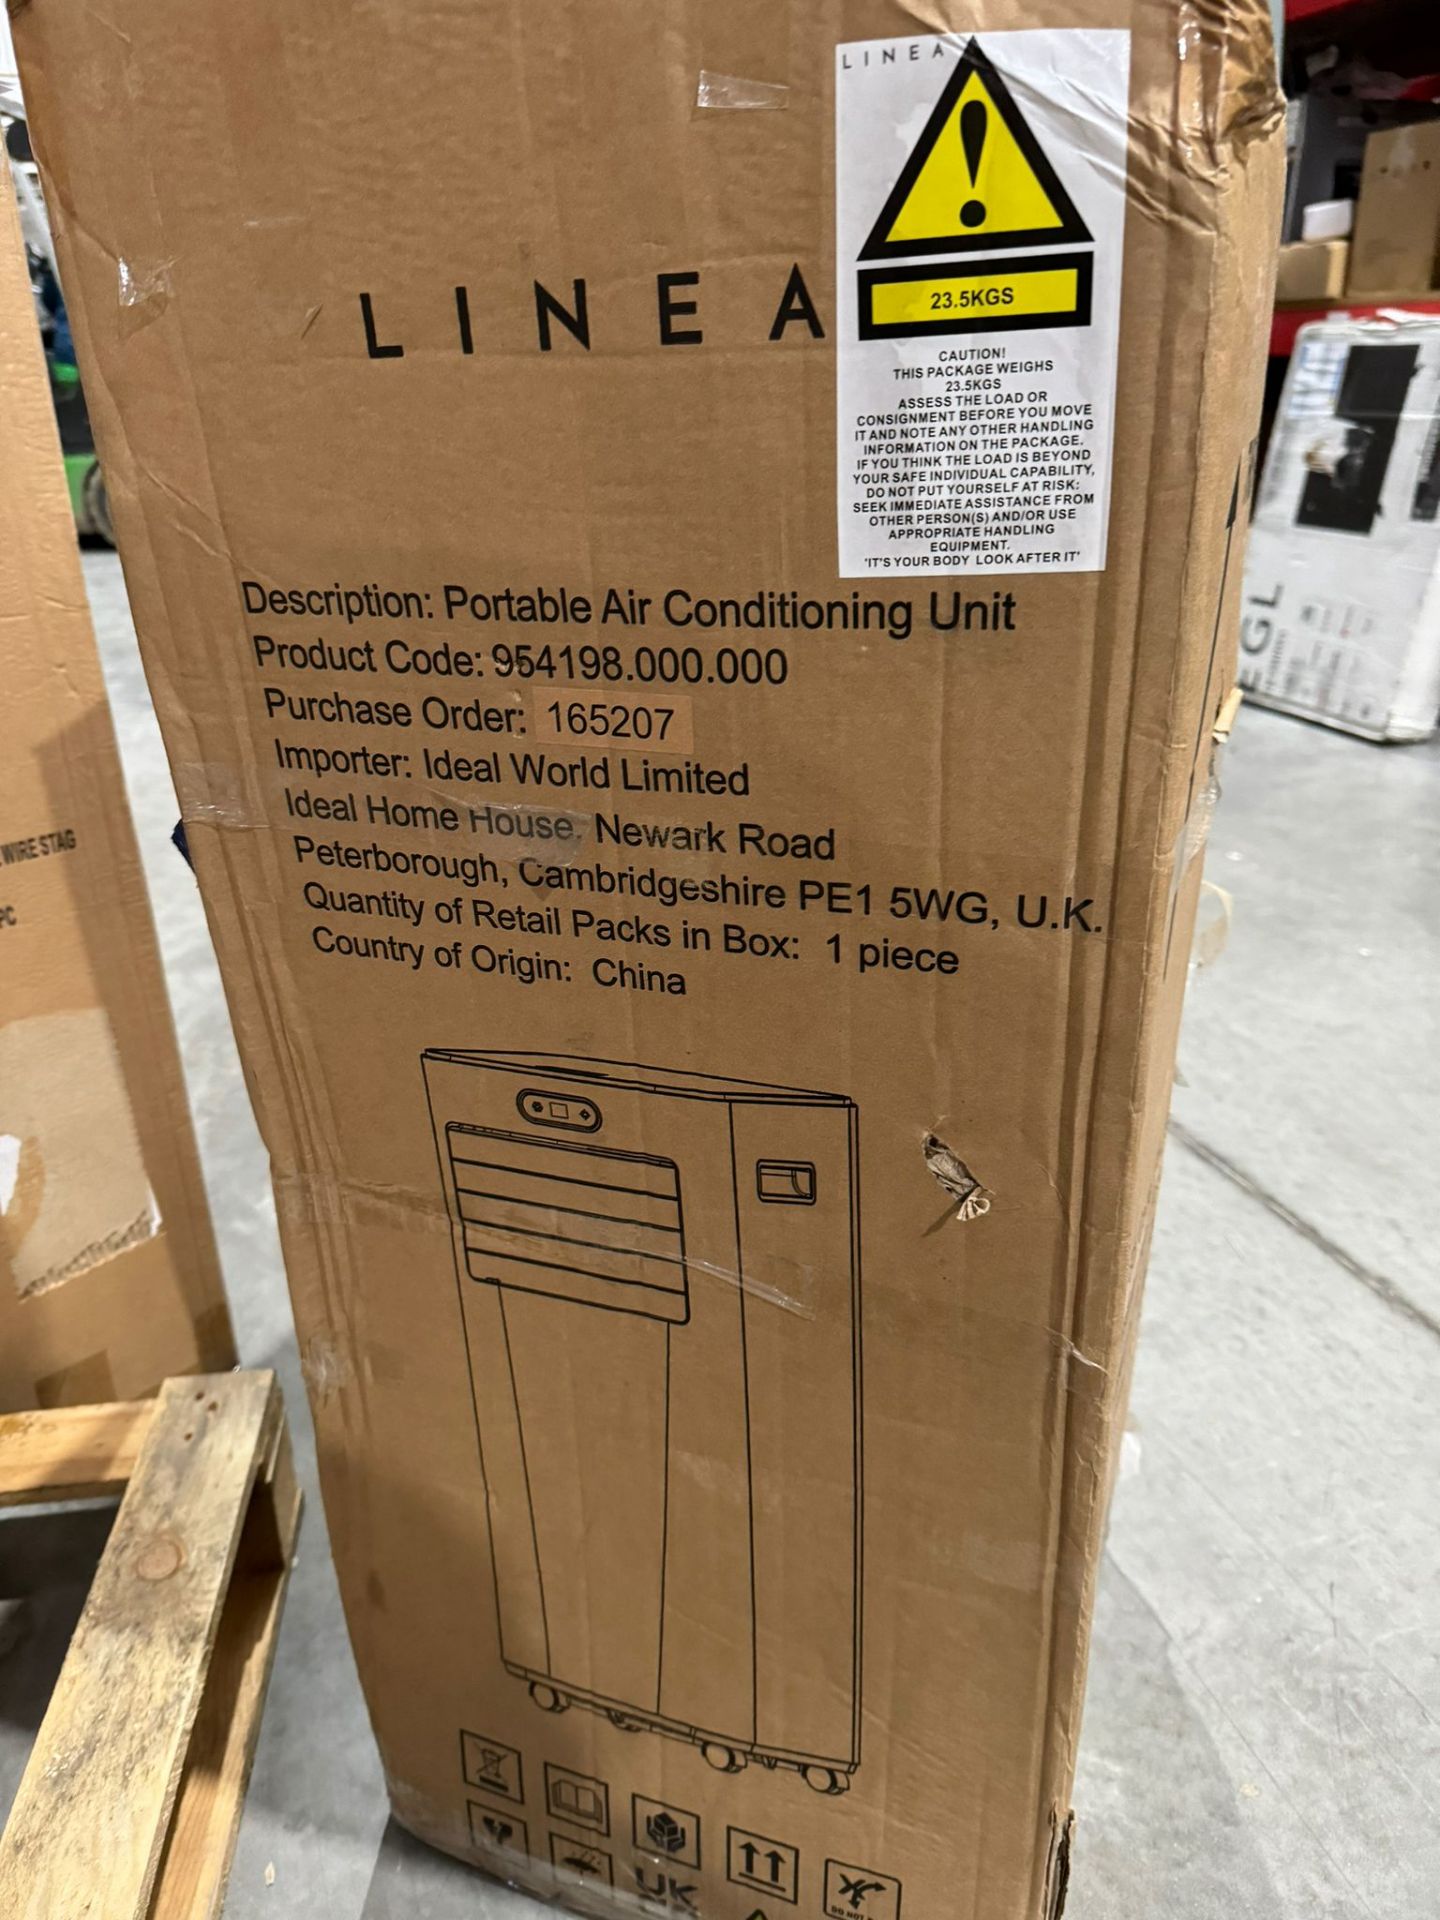 1 x LINEA Portable Air Conditioning Unit - 954198.000.000 with Window Kit - NO RESERVE - Image 4 of 8